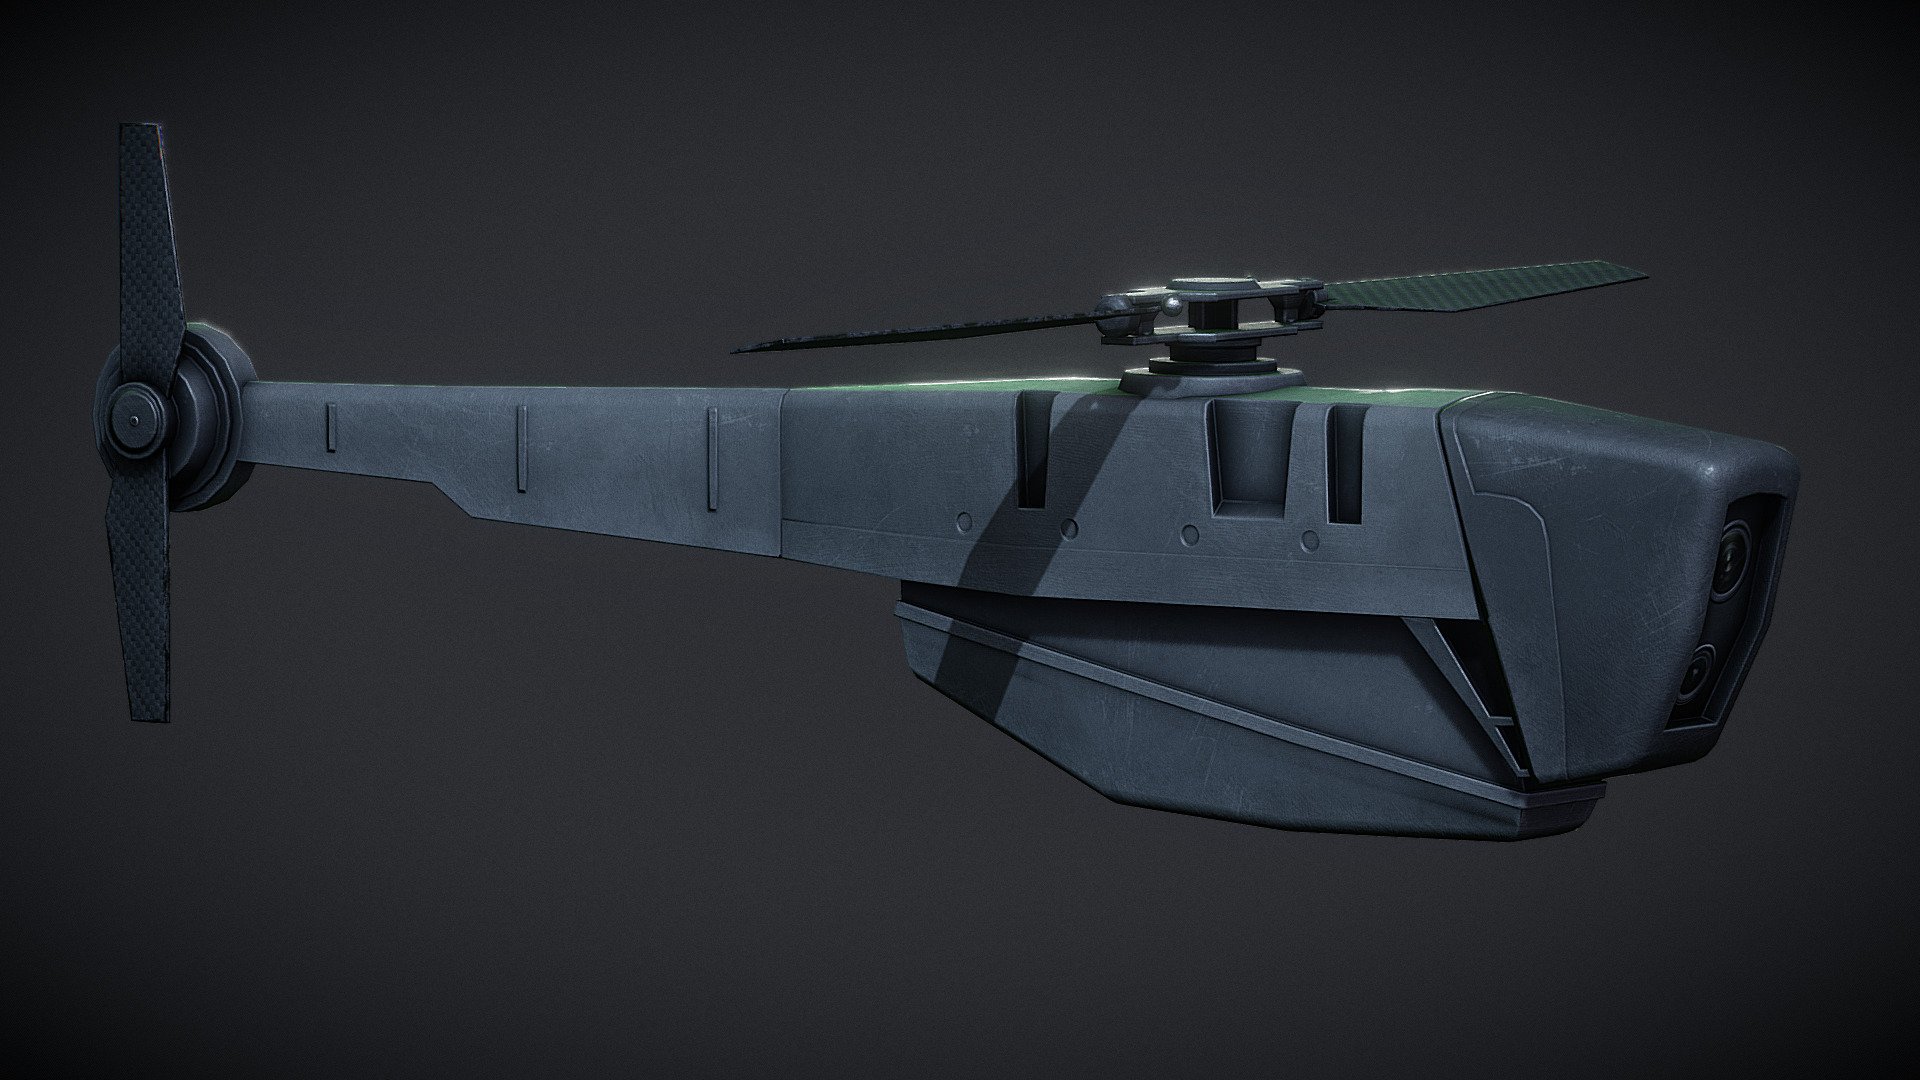 Nano helicopter unmanned aerial vehicle (UAV) inspired by military drone: Black Hornet Nano 3d model